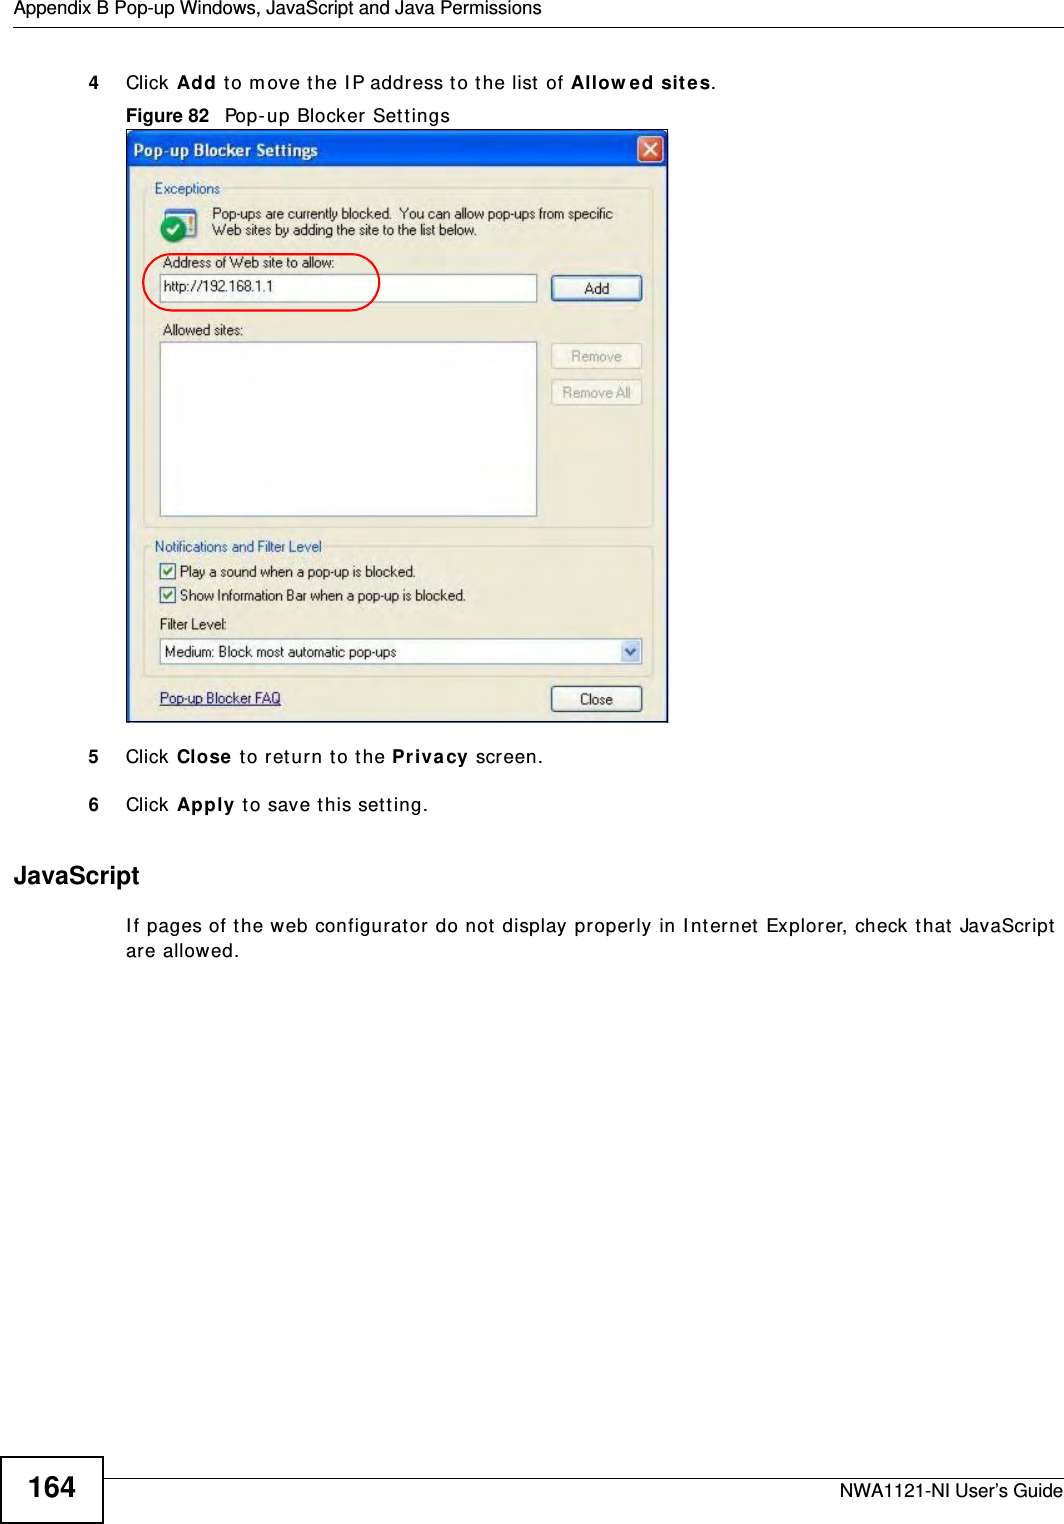 Appendix B Pop-up Windows, JavaScript and Java PermissionsNWA1121-NI User’s Guide1644Click Add to move the IP address to the list of Allowed sites.Figure 82   Pop-up Blocker Settings5Click Close to return to the Privacy screen. 6Click Apply to save this setting. JavaScriptIf pages of the web configurator do not display properly in Internet Explorer, check that JavaScript are allowed. 